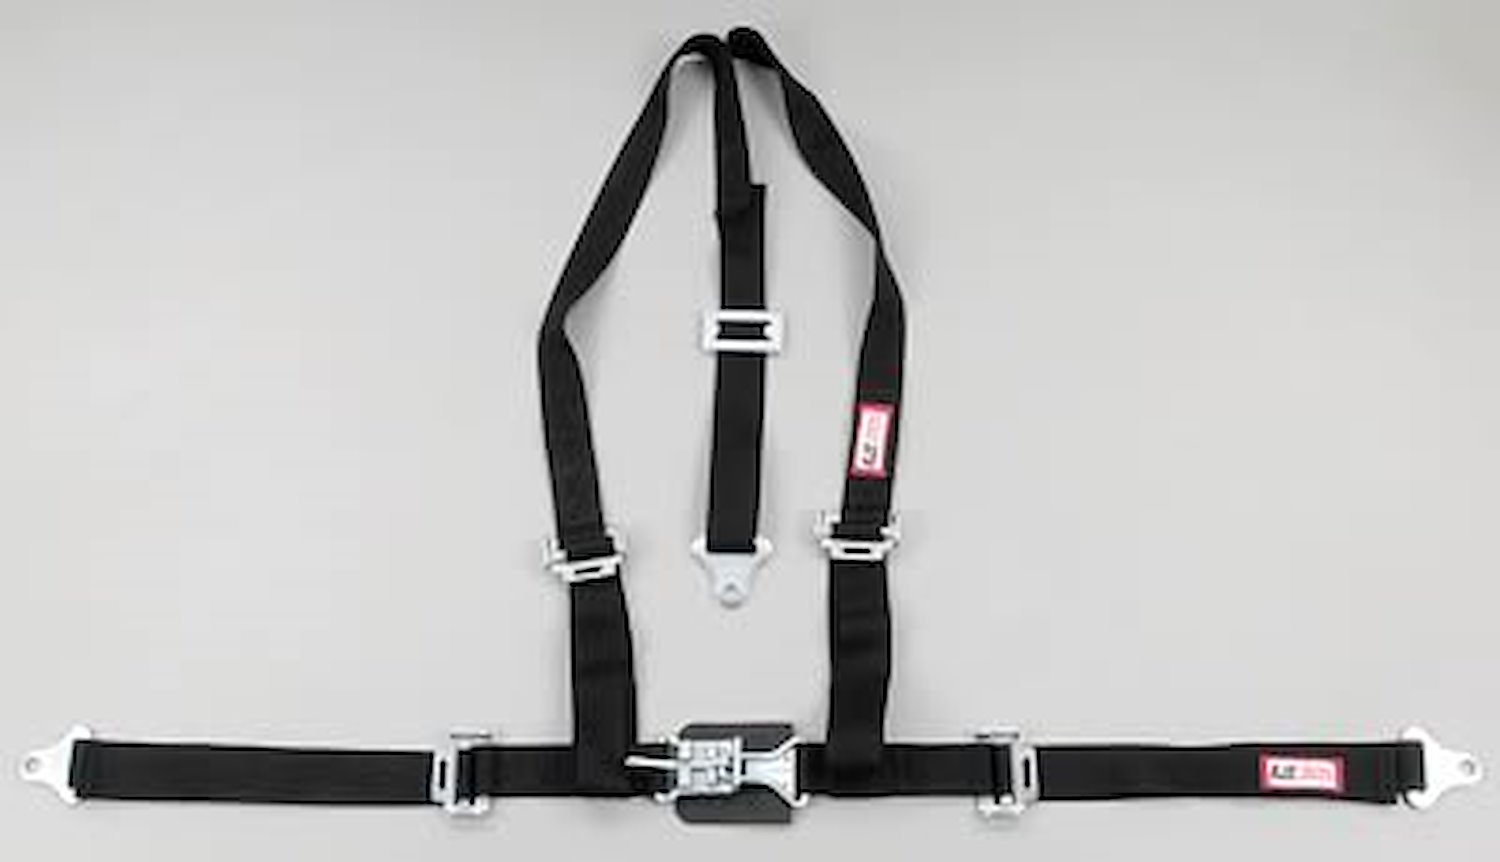 NON-SFI L&L HARNESS 2 PULL DOWN Lap Belt SEWN IN 2 S.H. Y FLOOR Mount ALL WRAP ENDS GRAY